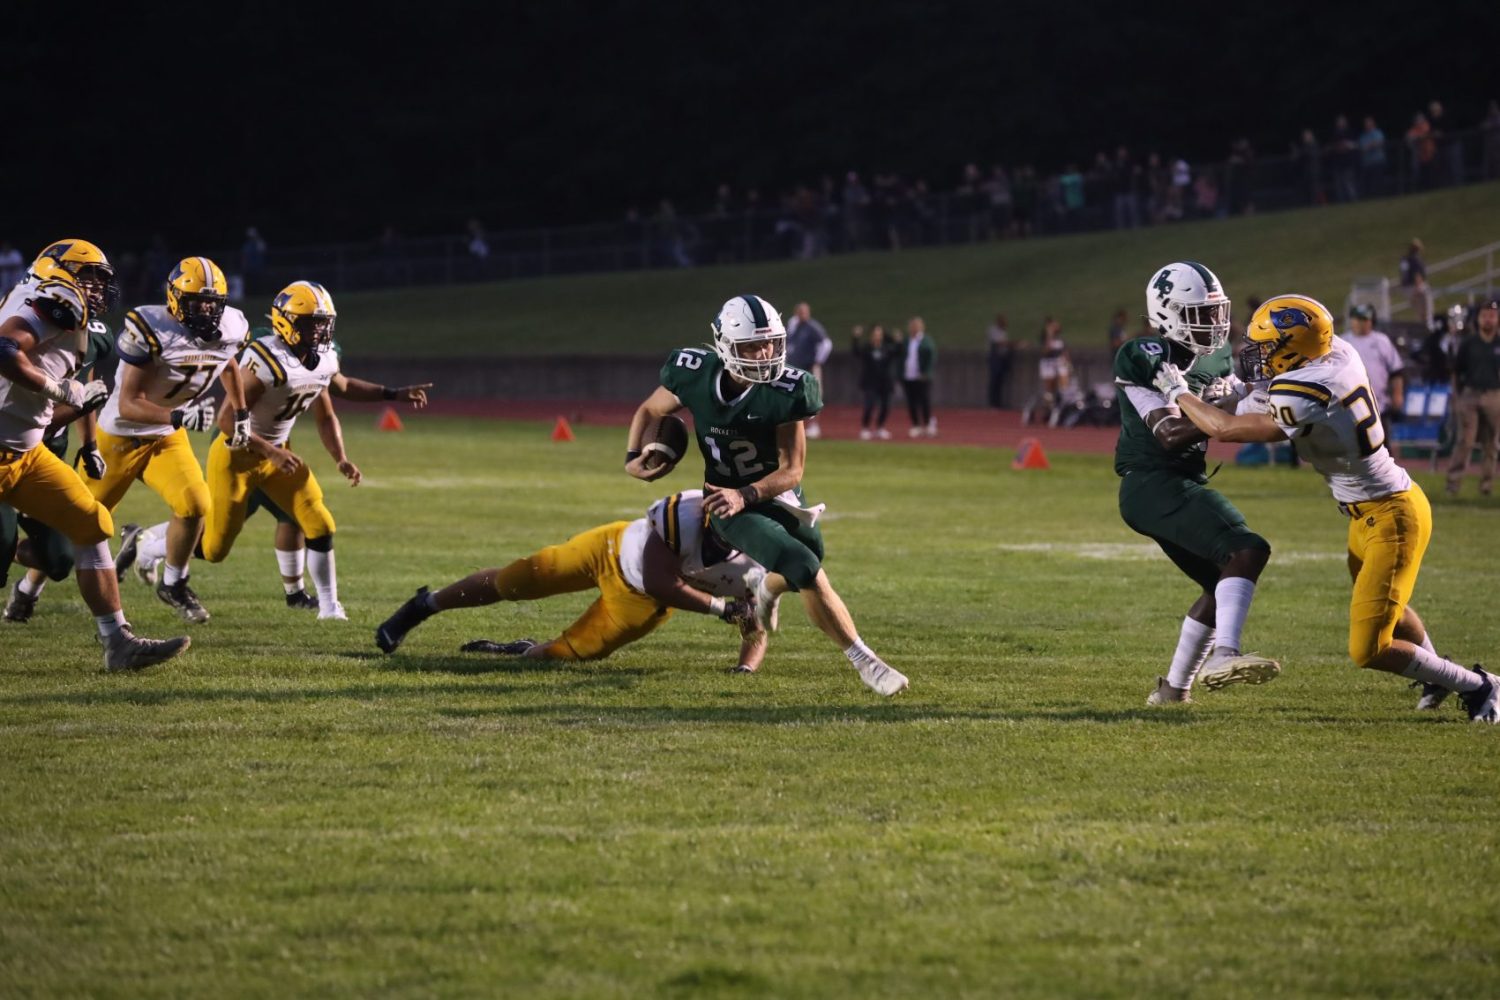 Reeths-Puffer travels to Muskegon for Week 3 showdown